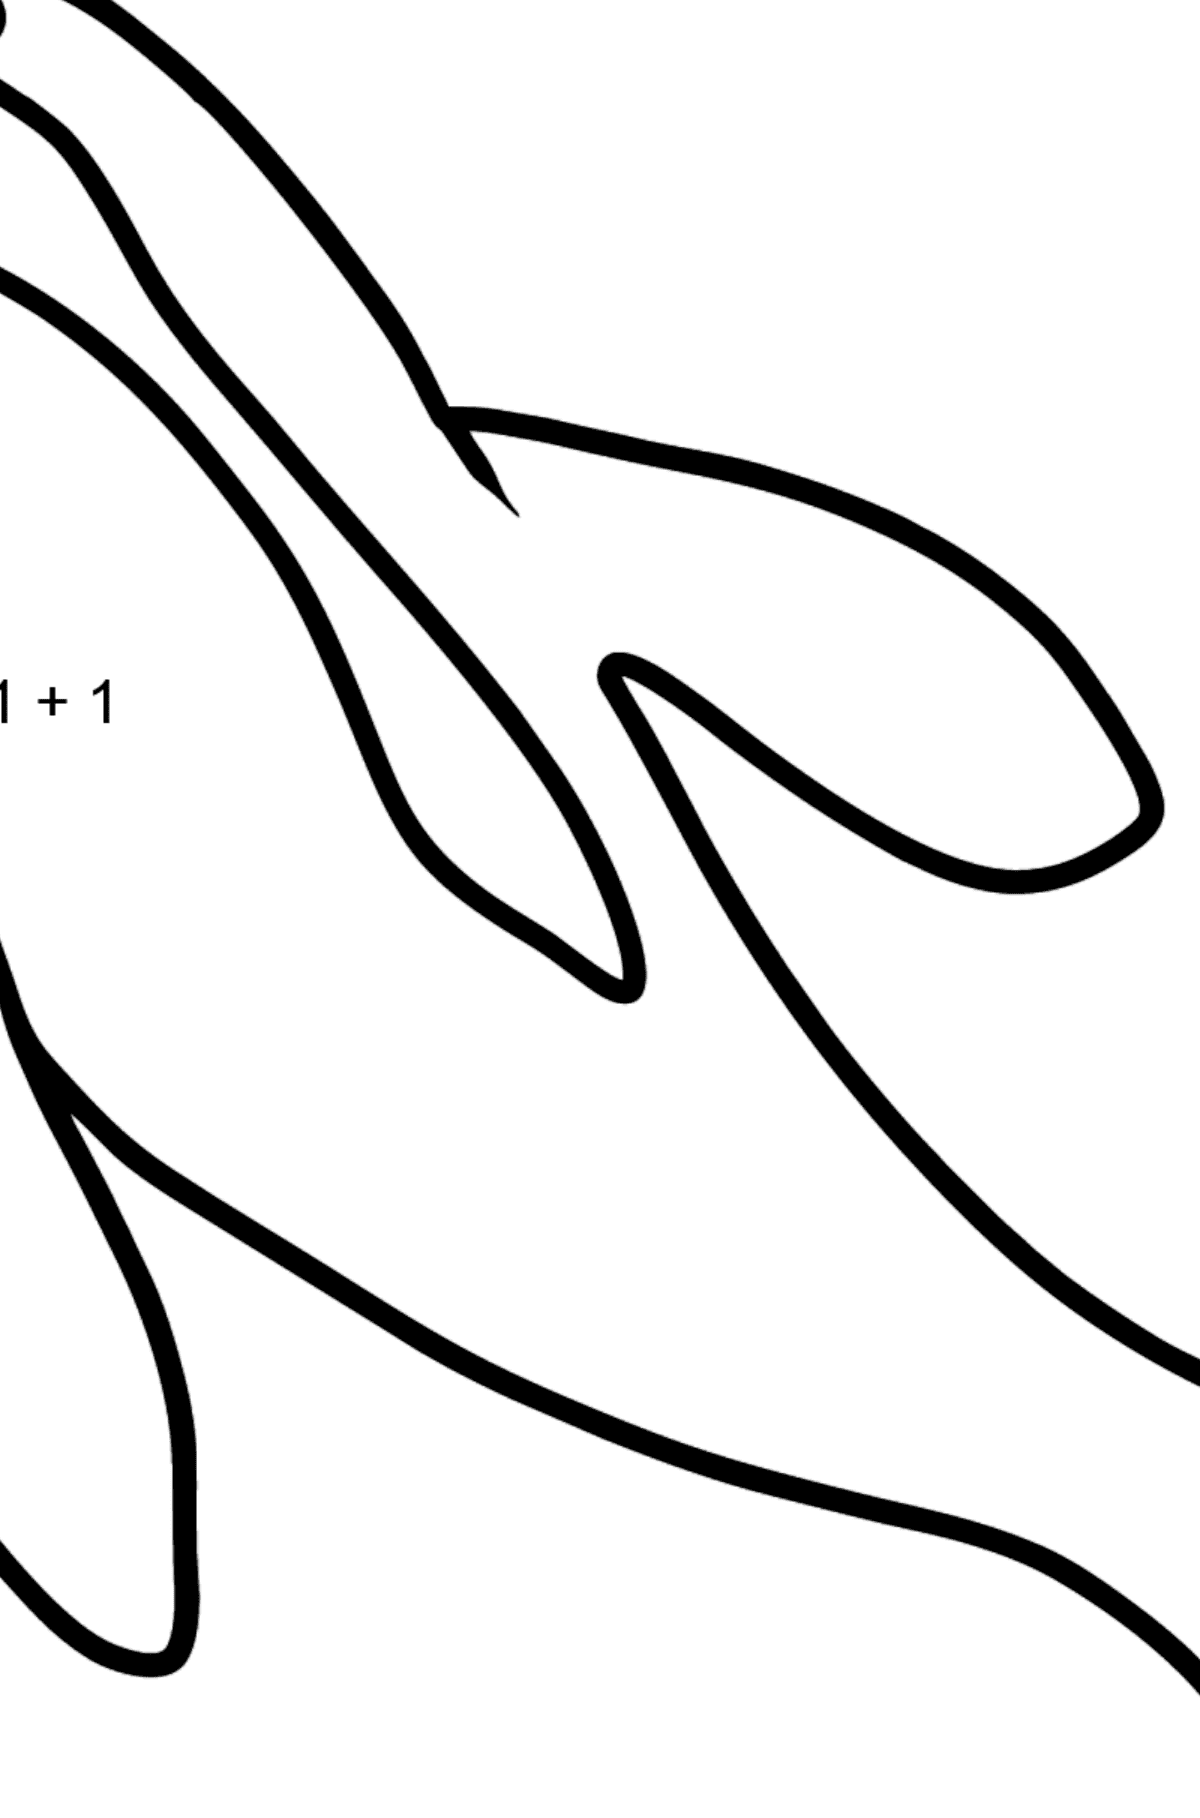 Dolphin coloring page - Math Coloring - Addition for Kids